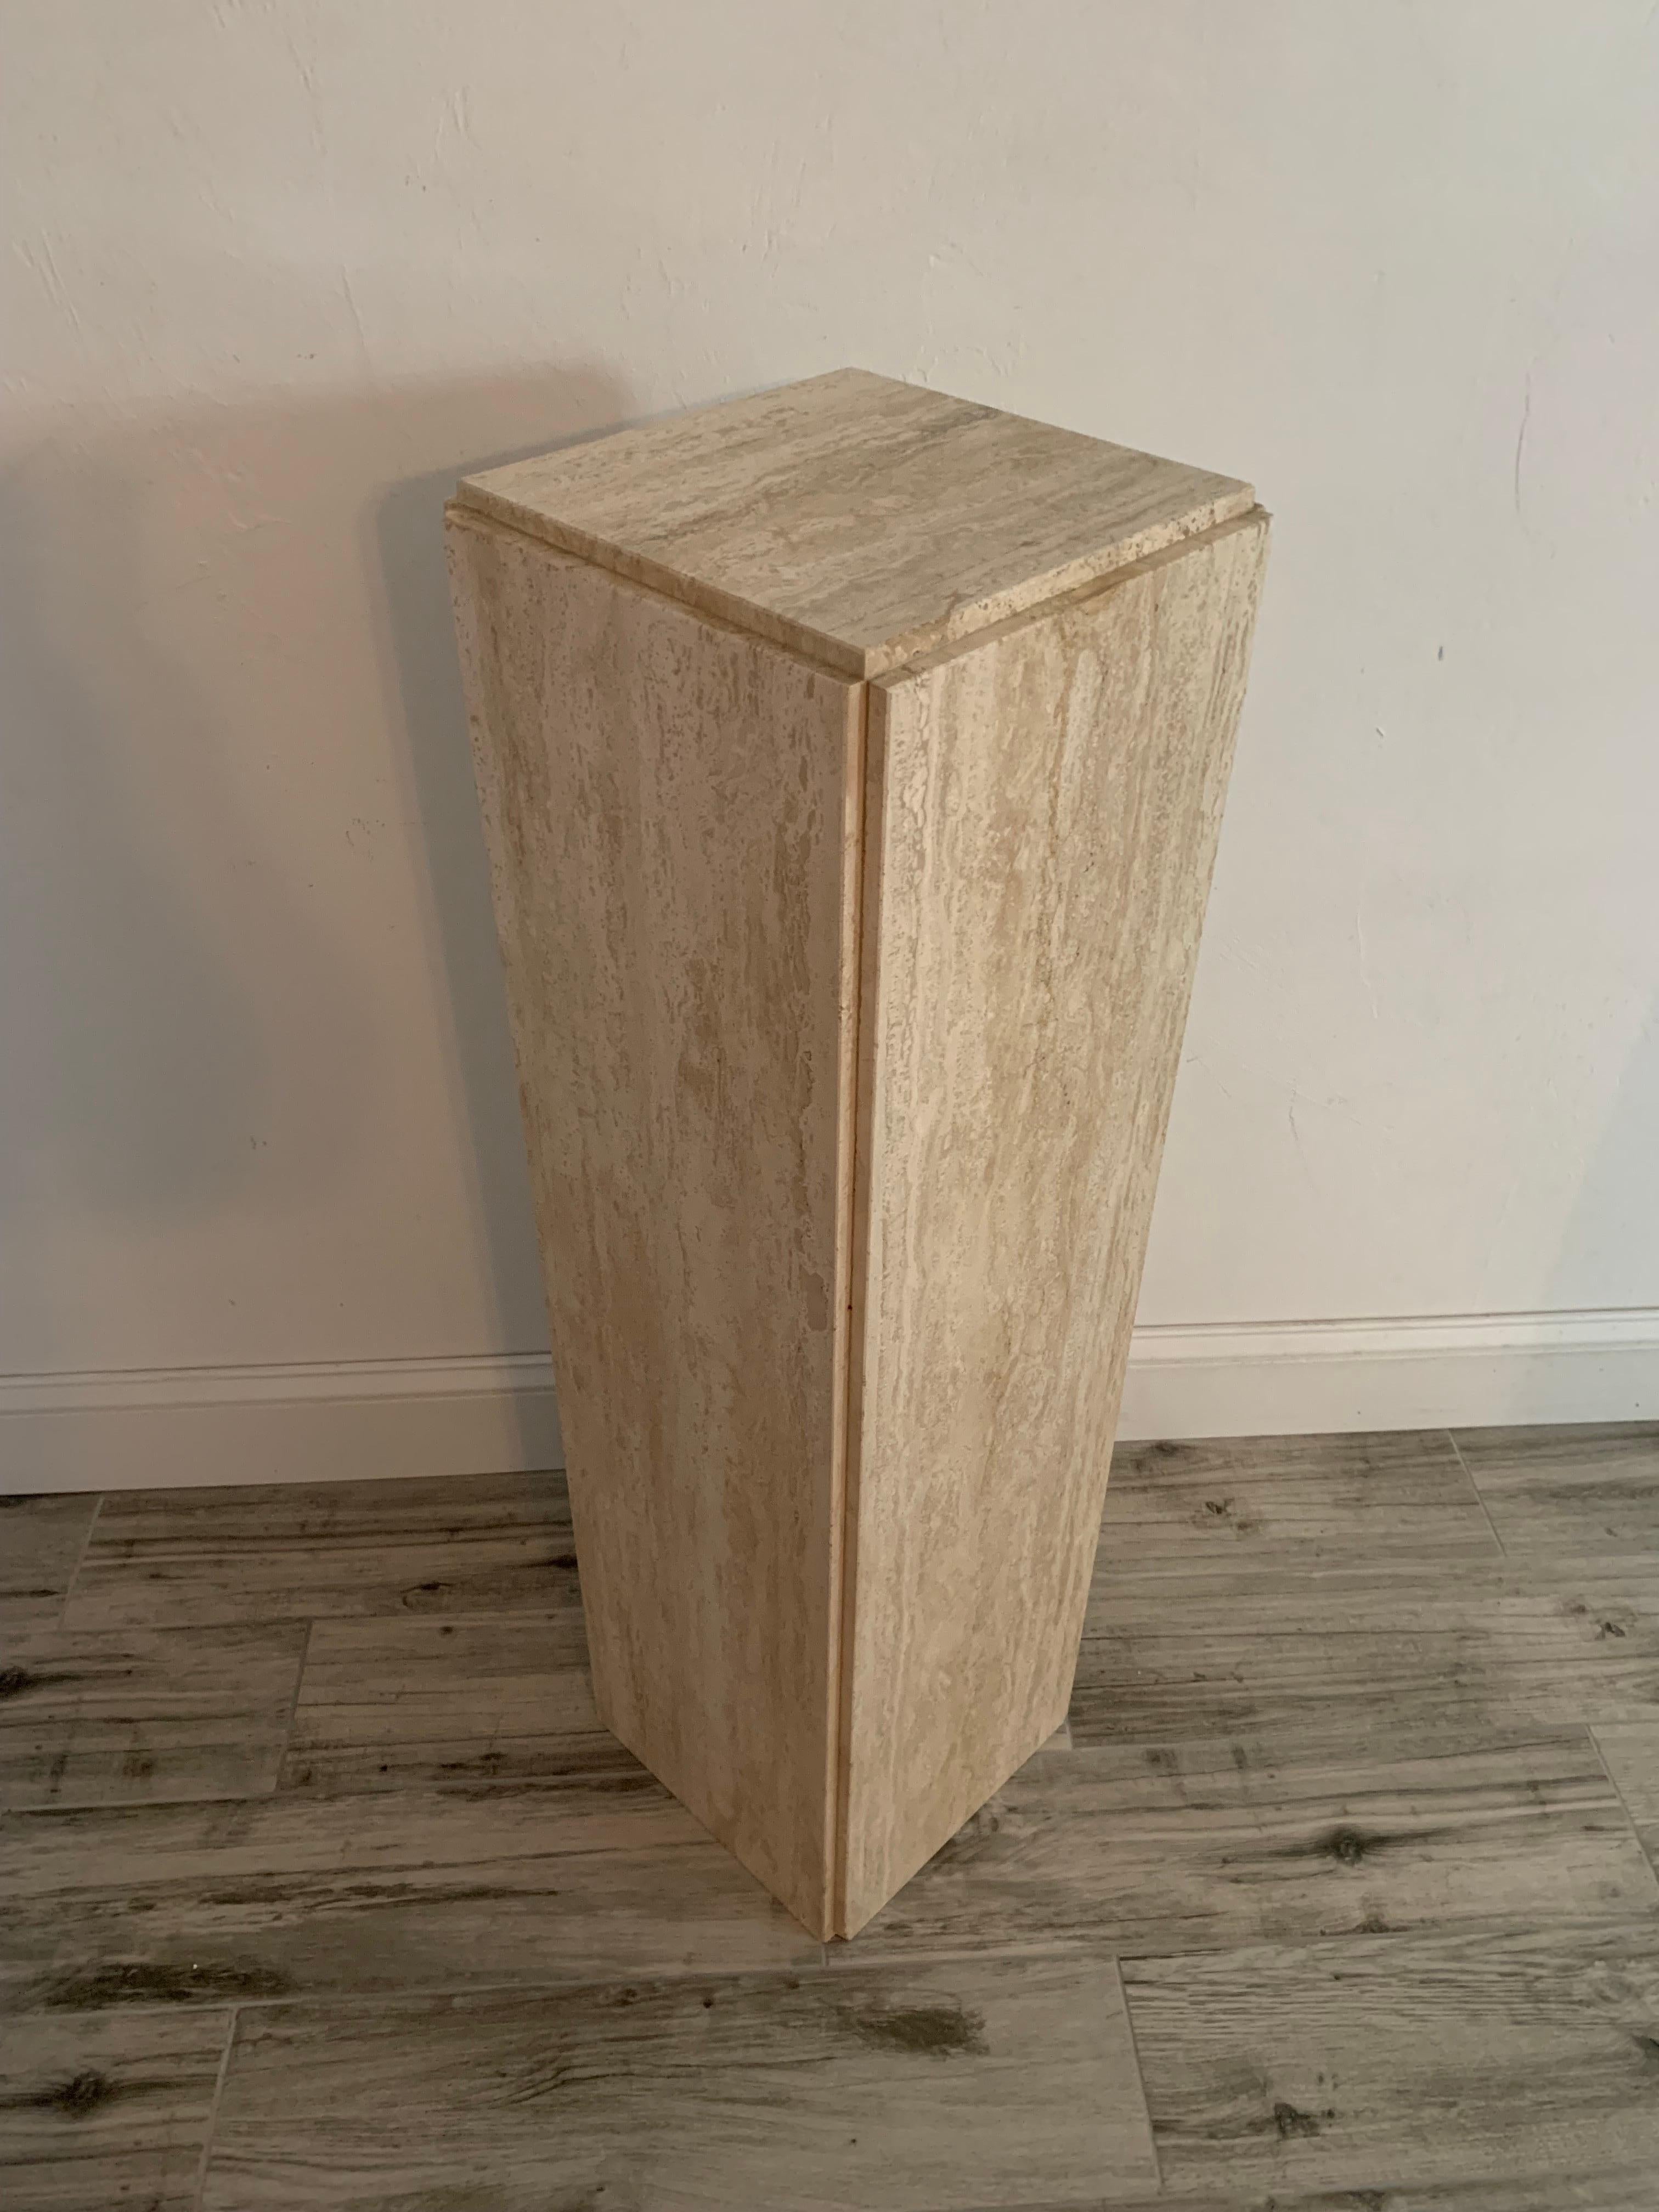 Beautiful Italian travertine marble pedestal / column / pillar / stand. 

Circa 1970s

Made in Italy 

Postomodern/modern in style. 

Beautiful array of colors including whites, sands, cream, and light browns make up the graining in the